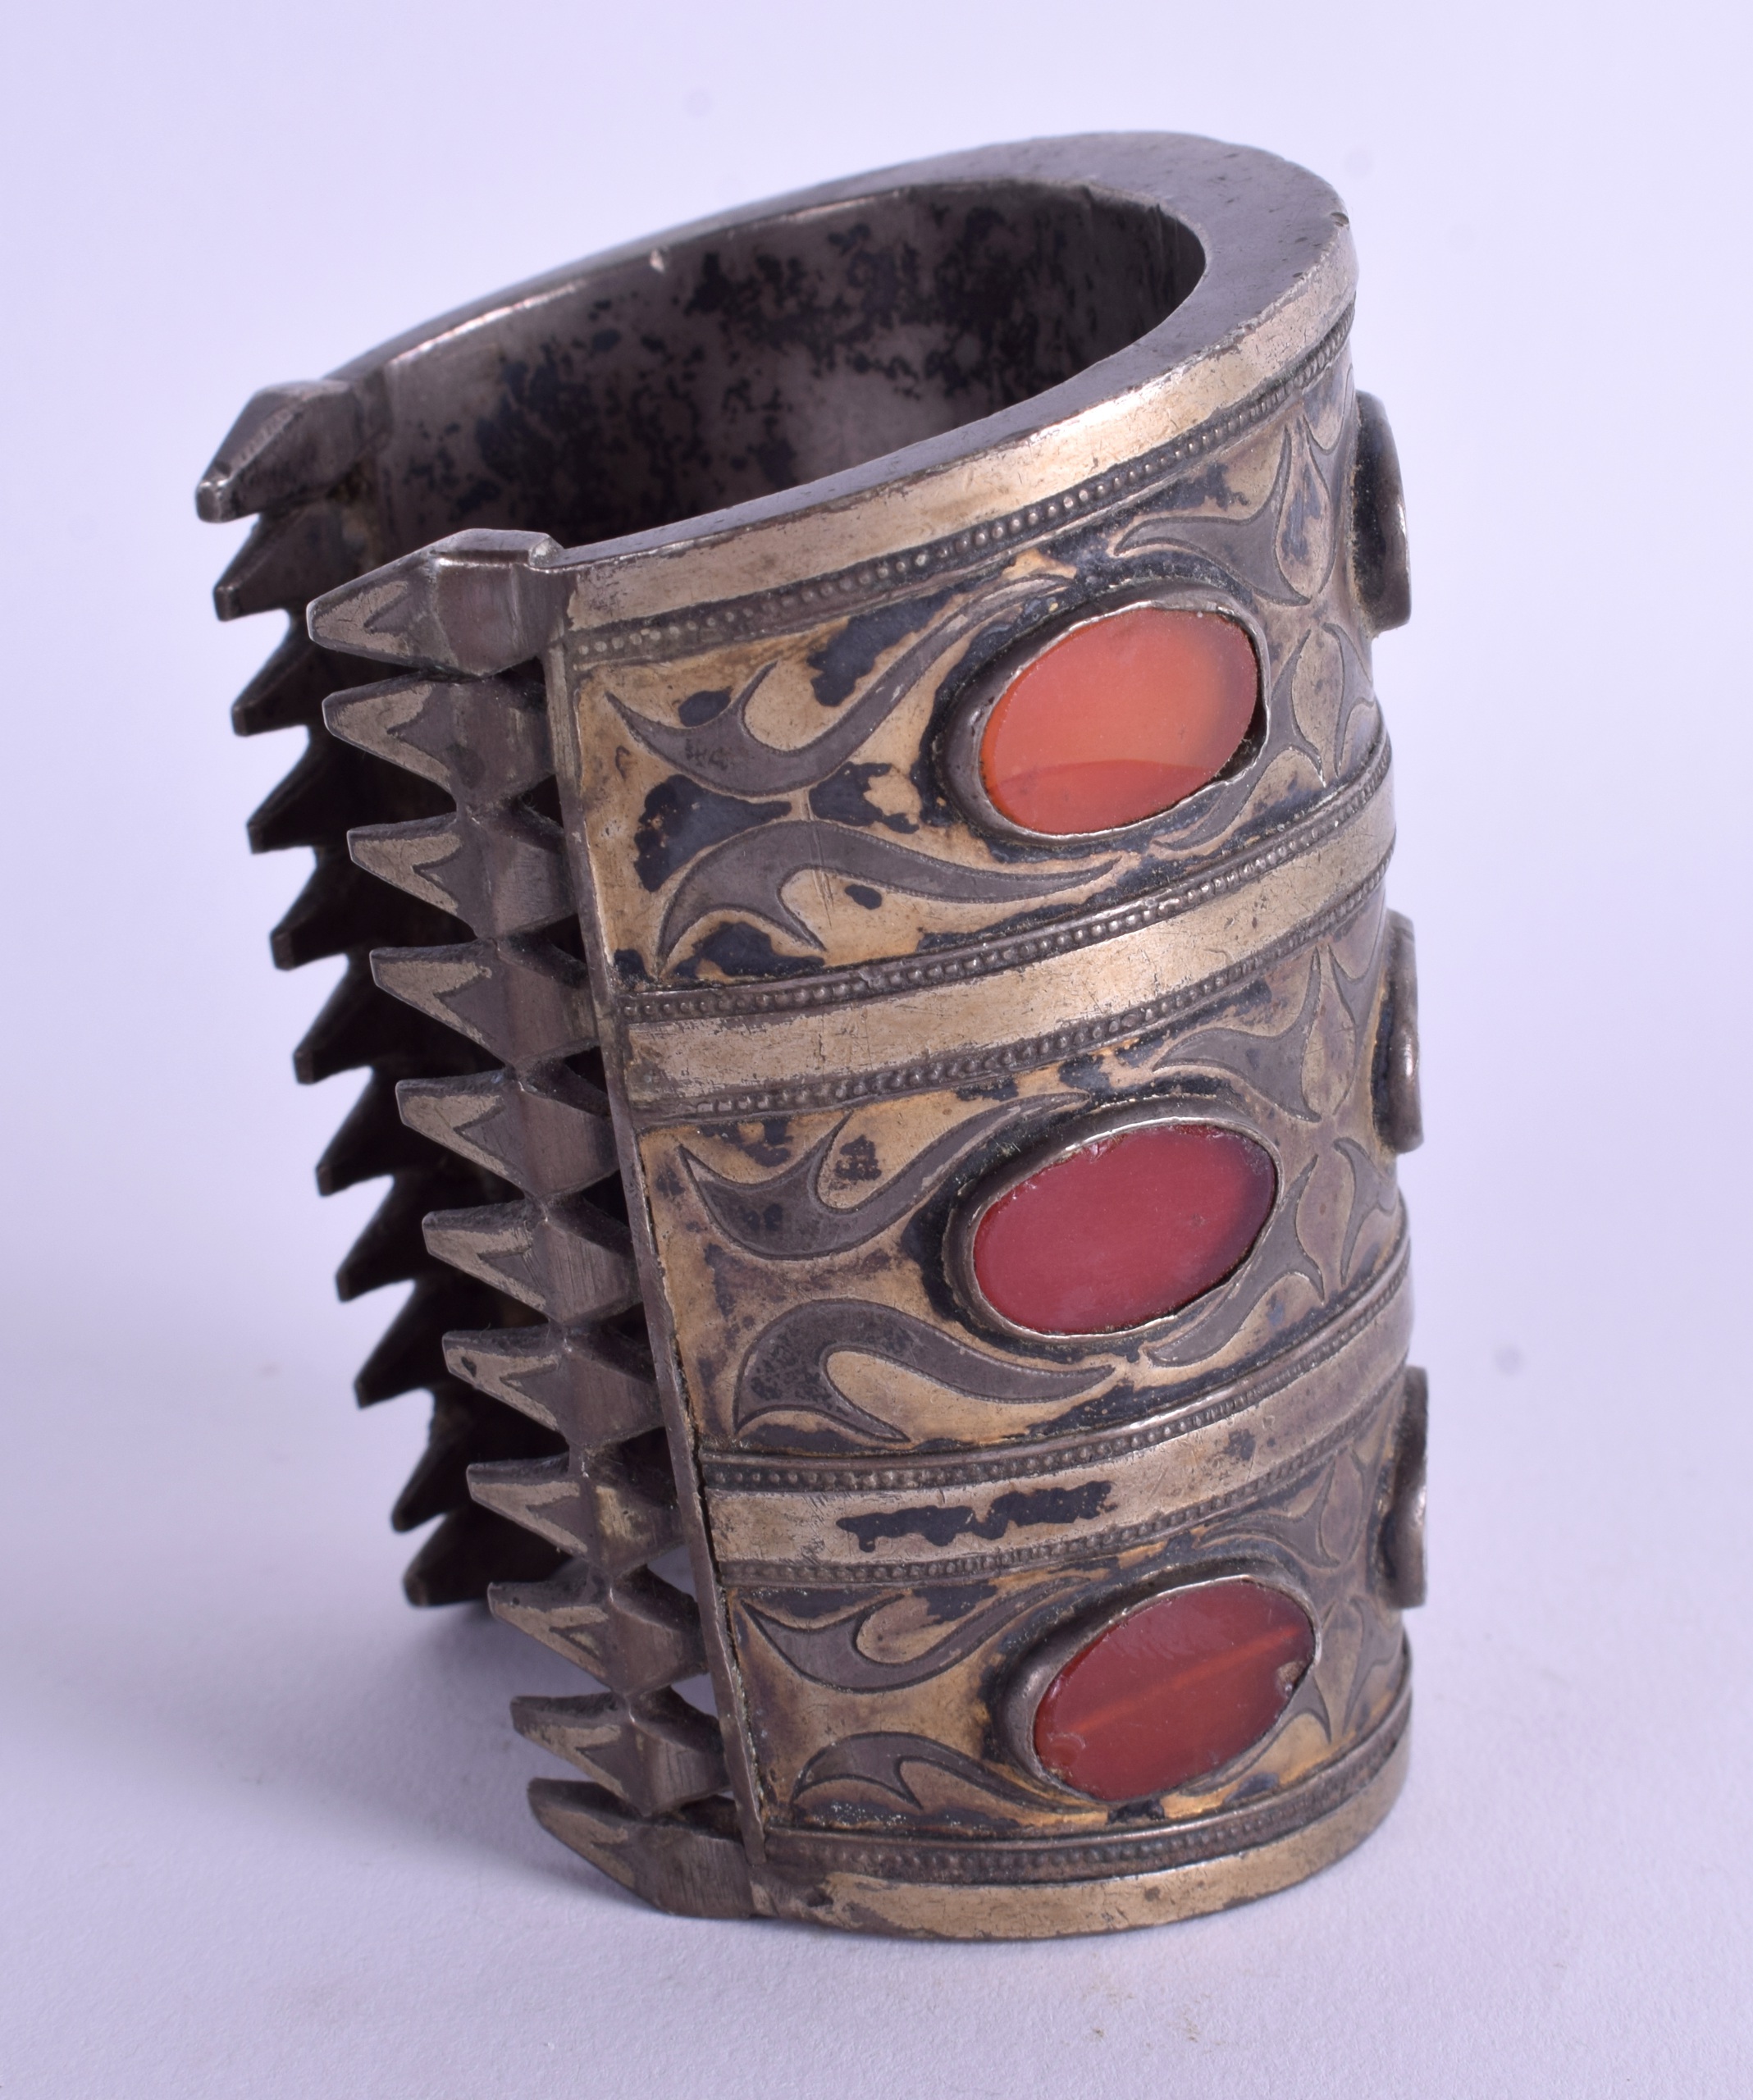 AN EARLY 20TH CENTURY MIDDLE EASTERN AGATE CUFF BANGLE. 9 cm x 7.5 cm. - Image 3 of 3